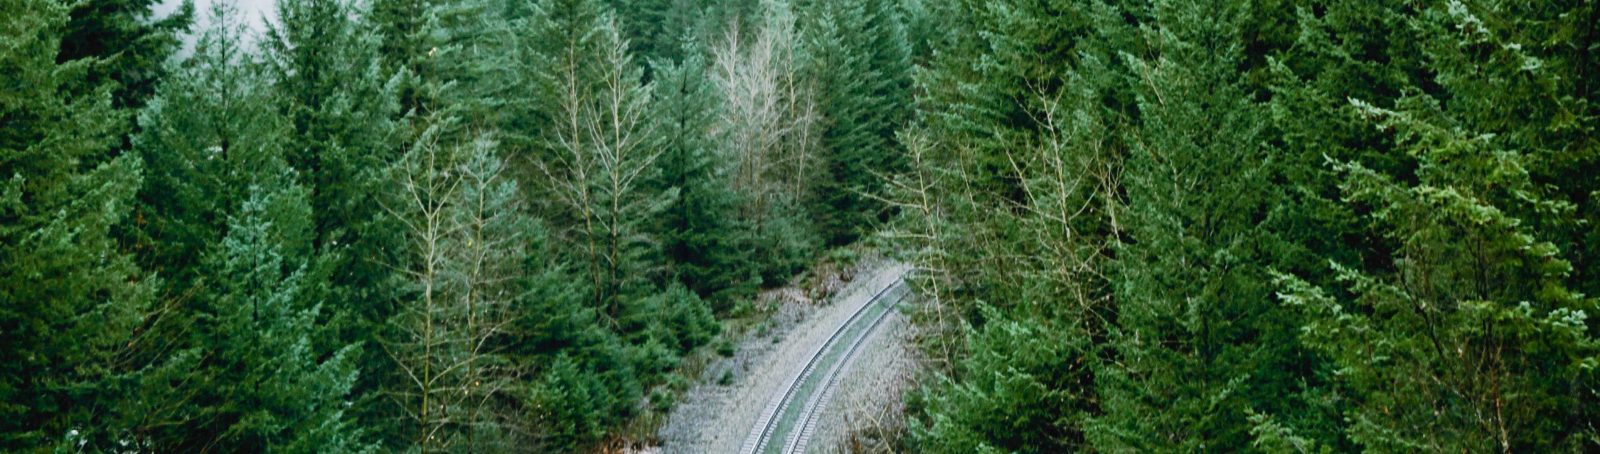 Rail road tracks surrounded by forest and mountains